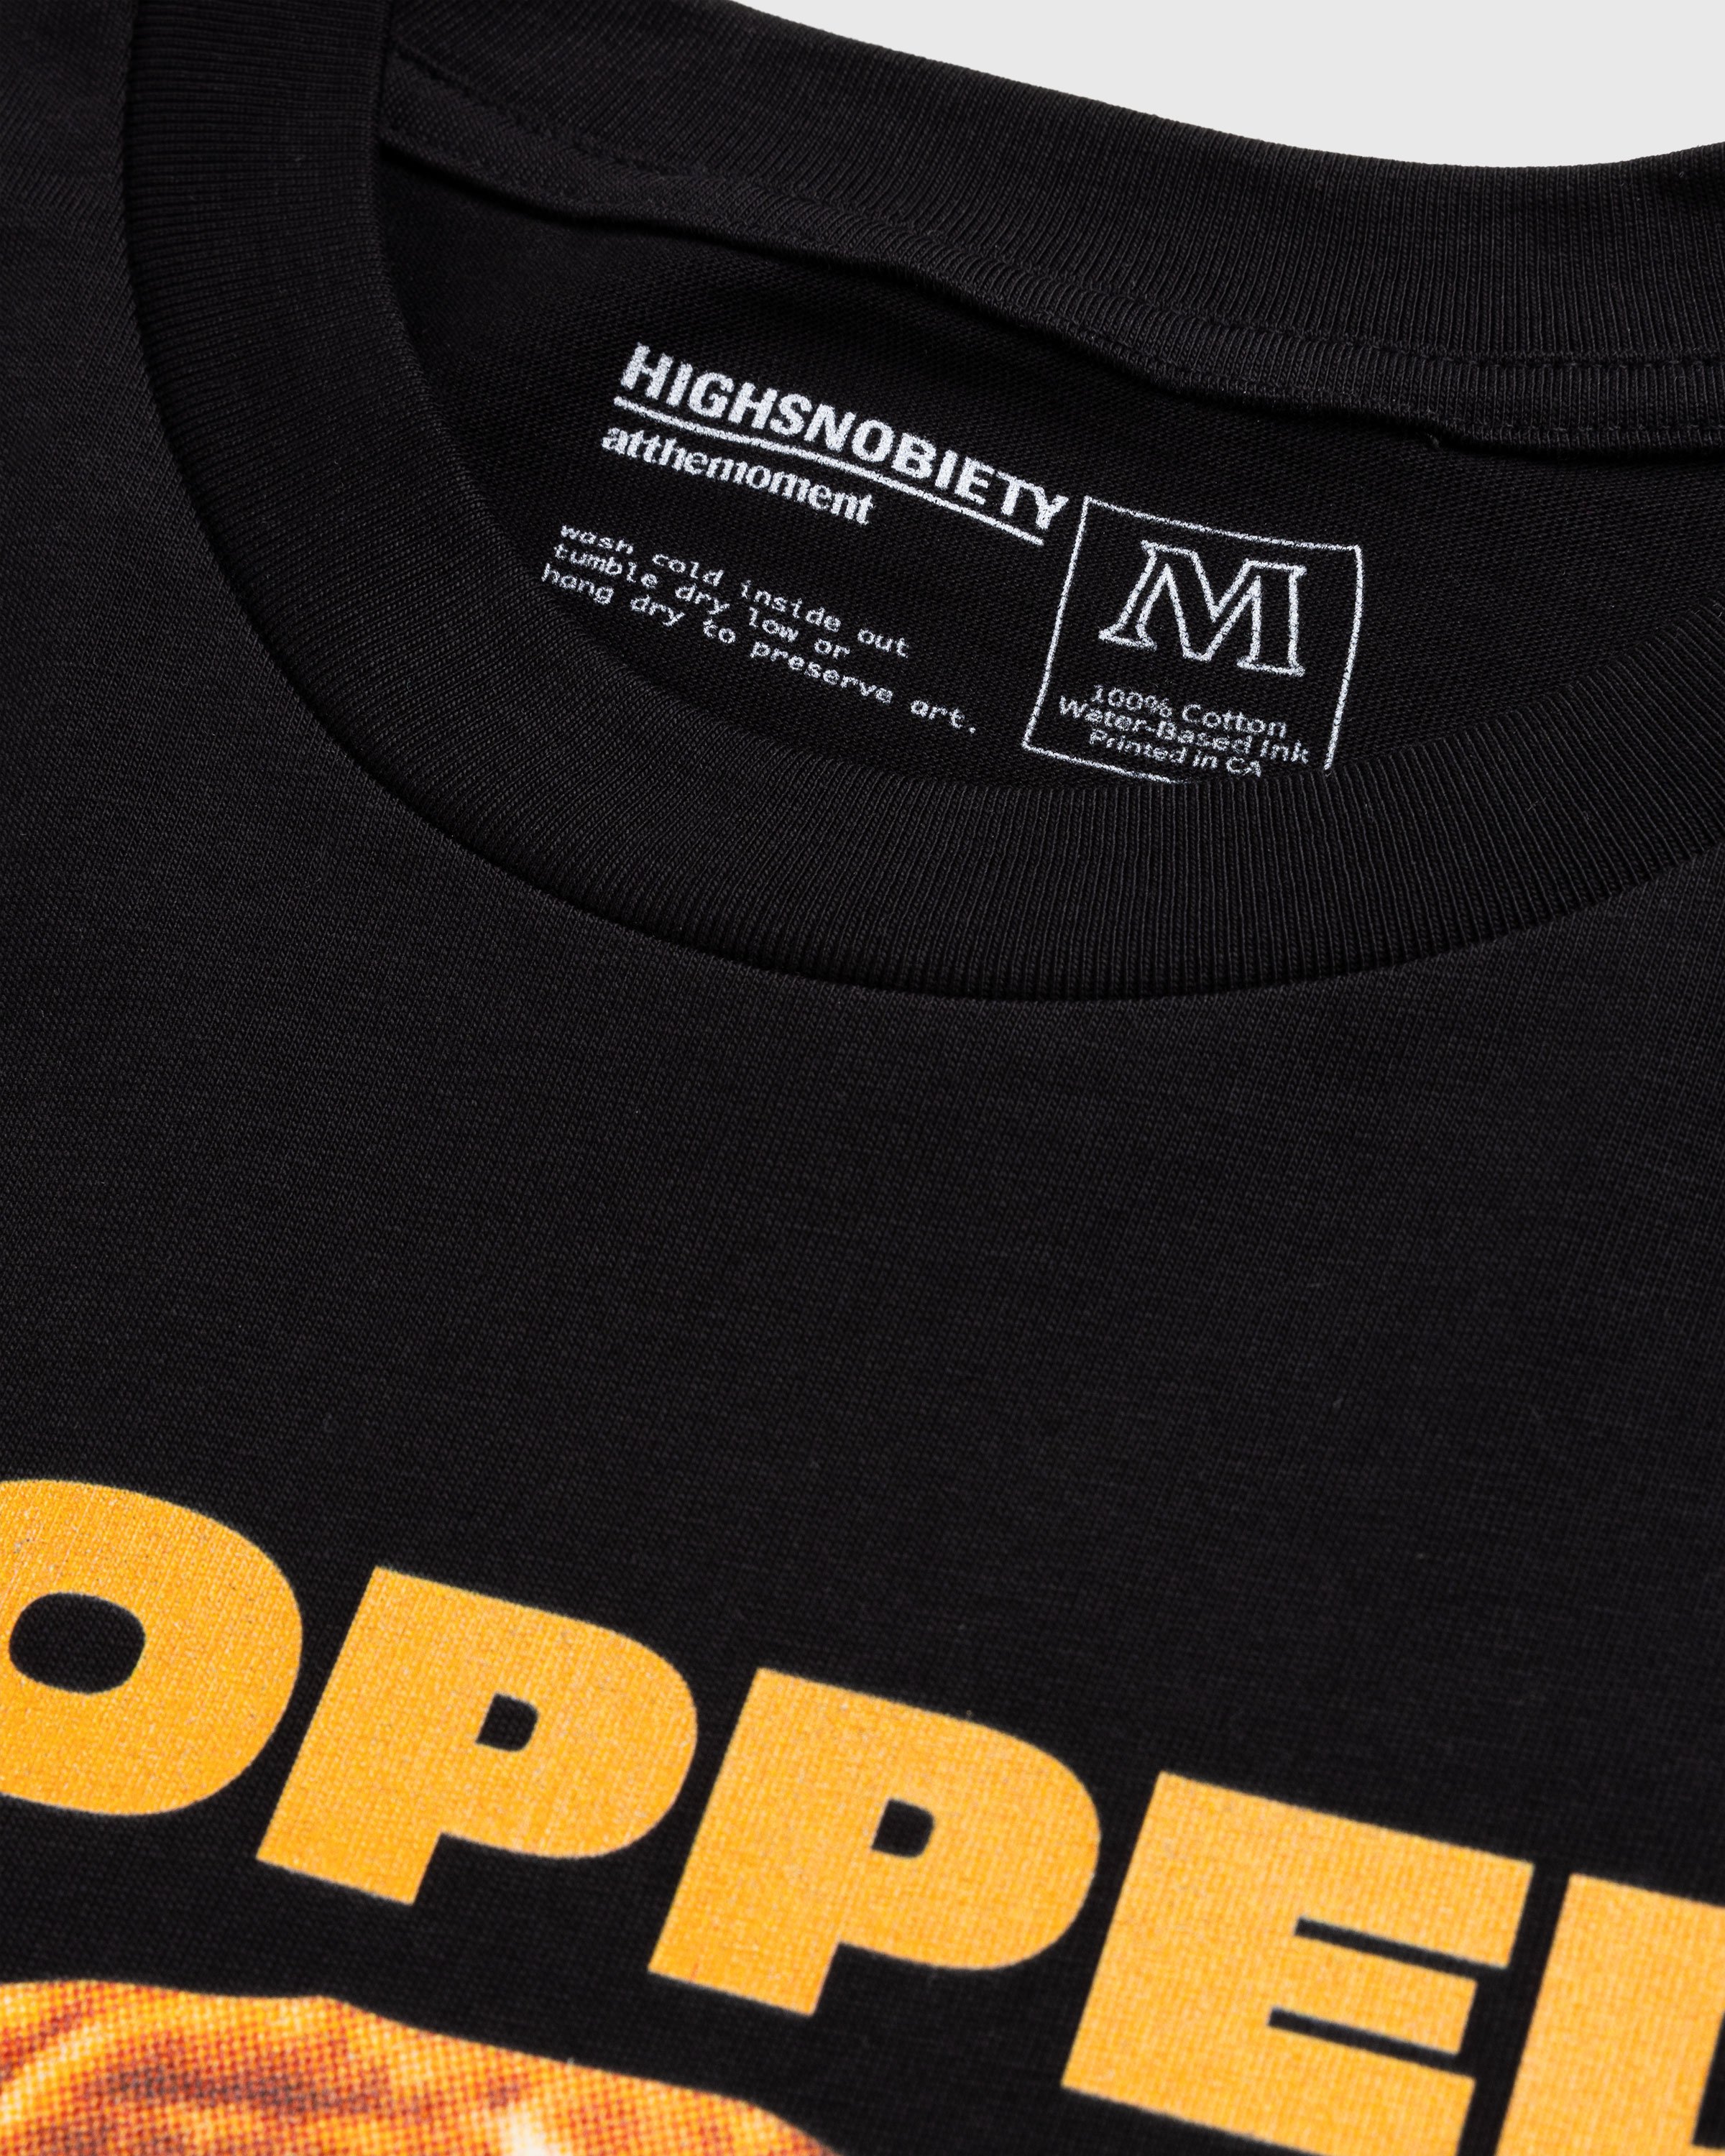 At The Moment x Highsnobiety - Chopped Cheese T-Shirt - Clothing - Black - Image 6